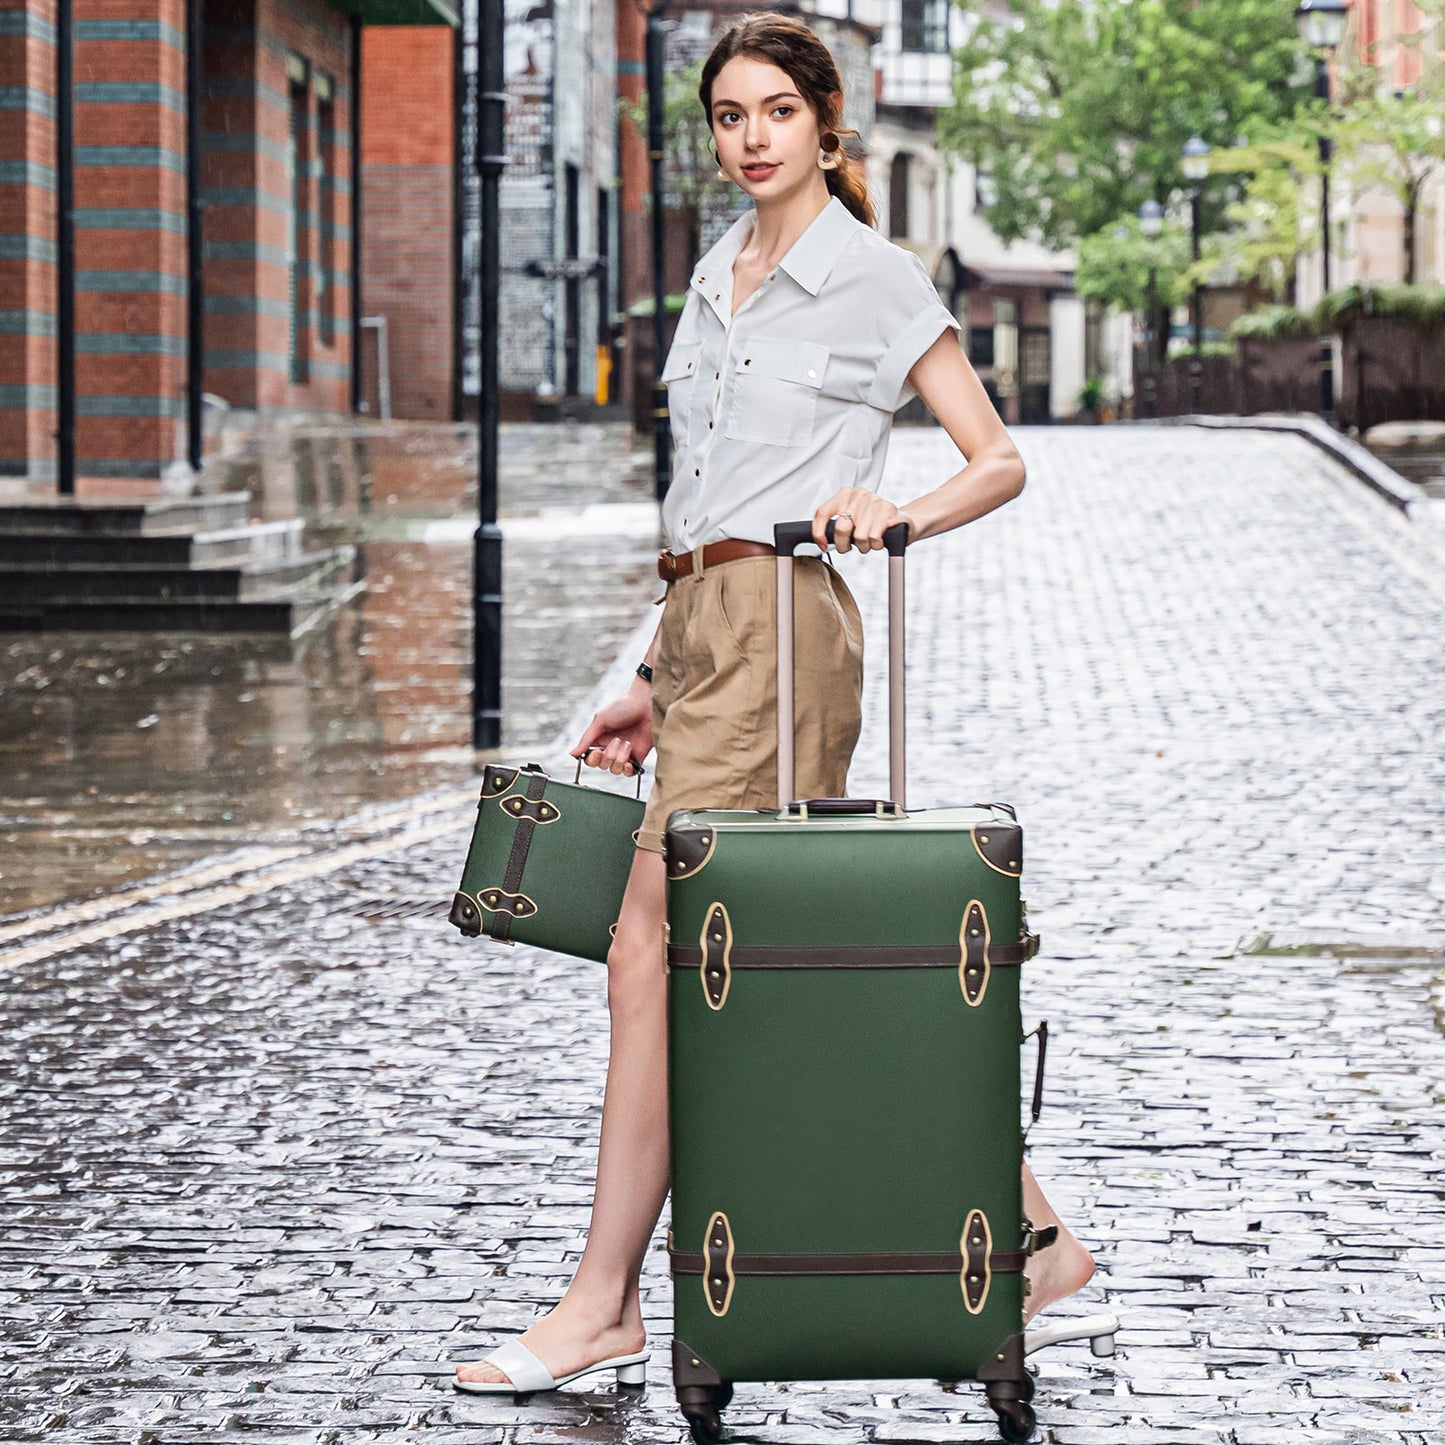 urecity Vintage Luggage Set, Trunk Style Suitcase with Wheels, 2-Piece  Hardside Luggage and Beauty Case Set (Army Green, 26+12)